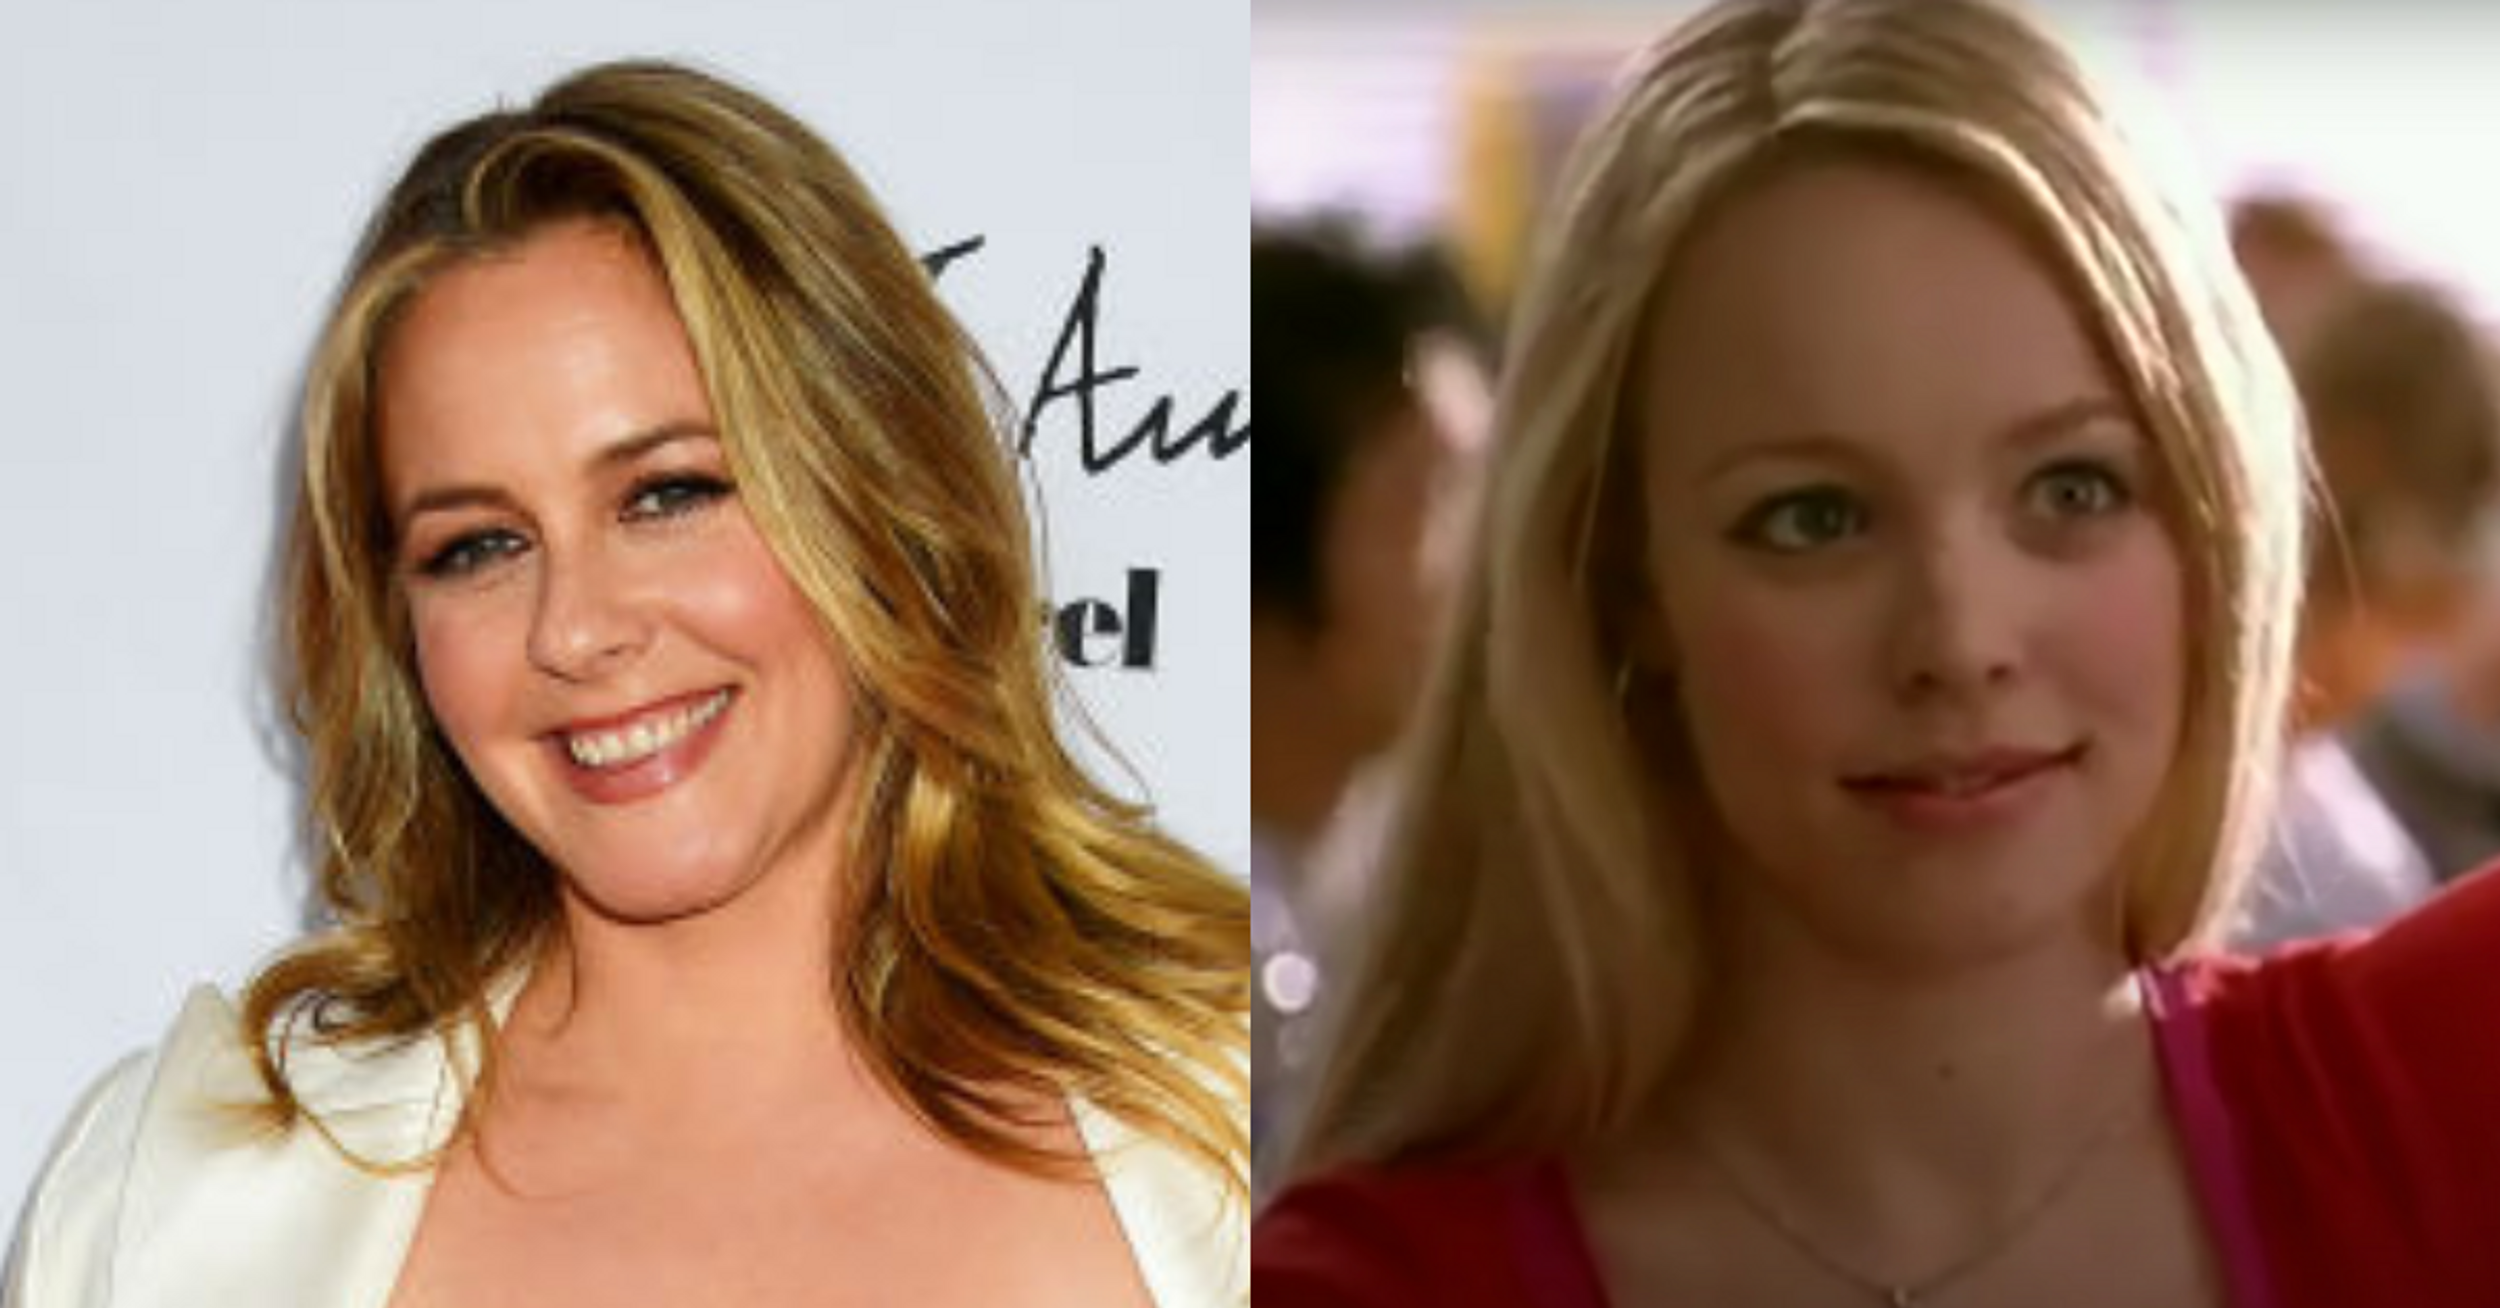 Alicia Silverstone Celebrates 'Mean Girls Day' With Hilarious 'Clueless' Mashup Post